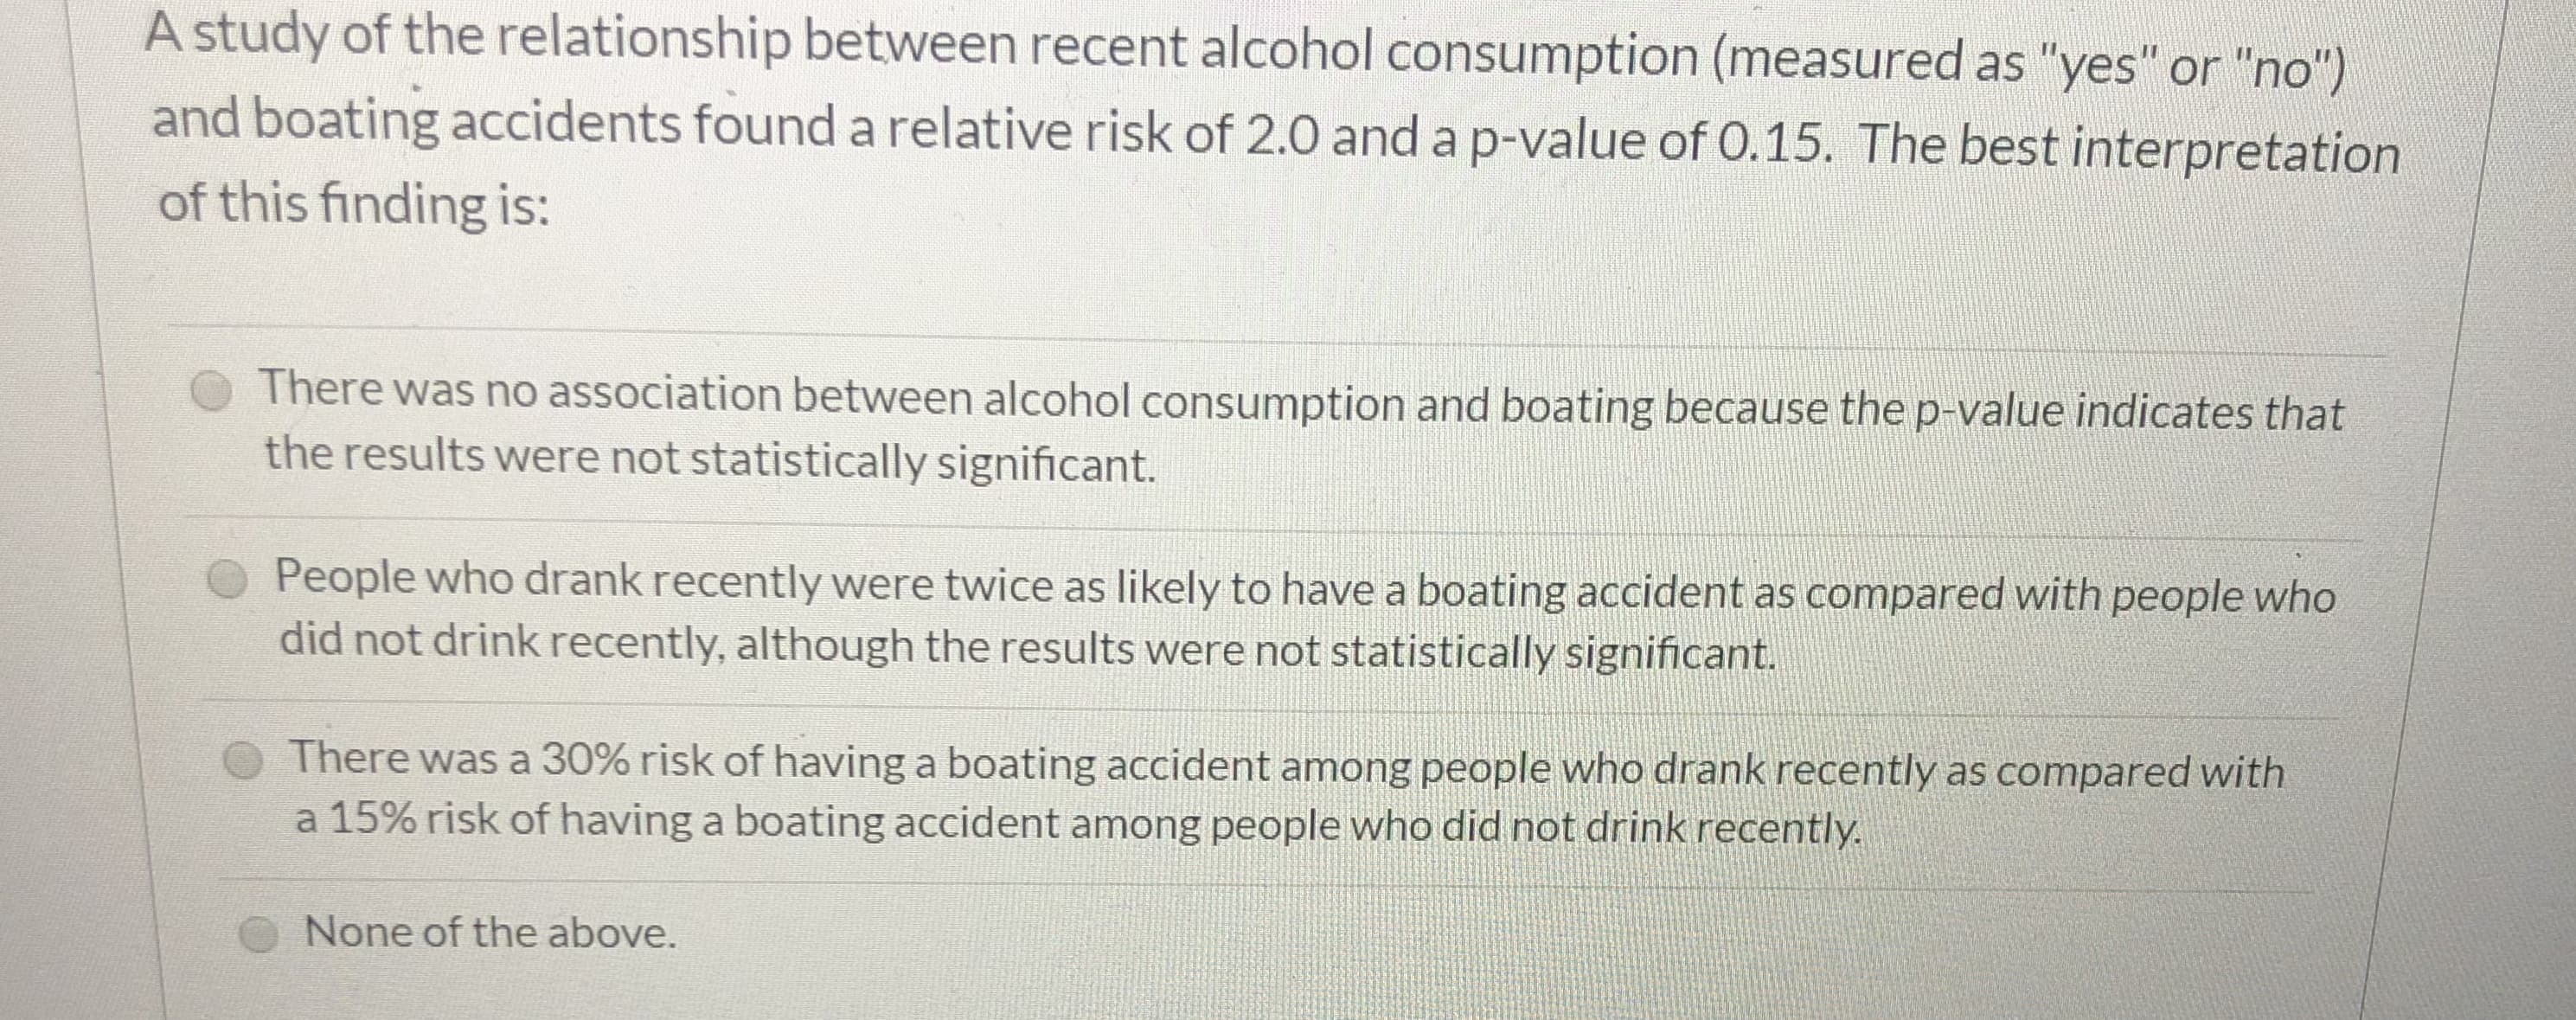 A study of the relationship between recent alcohol consumption (measured as "yes" or "no")
and boating accidents found a relative risk of 2.0 and a p-value of 0. 15. The best interpretation
of this finding is:
There was no association between alcohol consumption and boating because the p-value indicates that
the results were not statistically significant.
People who drank recently were twice as likely to have a boating accident as compared with people who
did not drink recently, although the results were not statistically significant.
There was a 30% risk of having a boating accident among people who drank recently as compared with
a 15% risk of having a boating accident among people who did not drink recently
None of the above.
